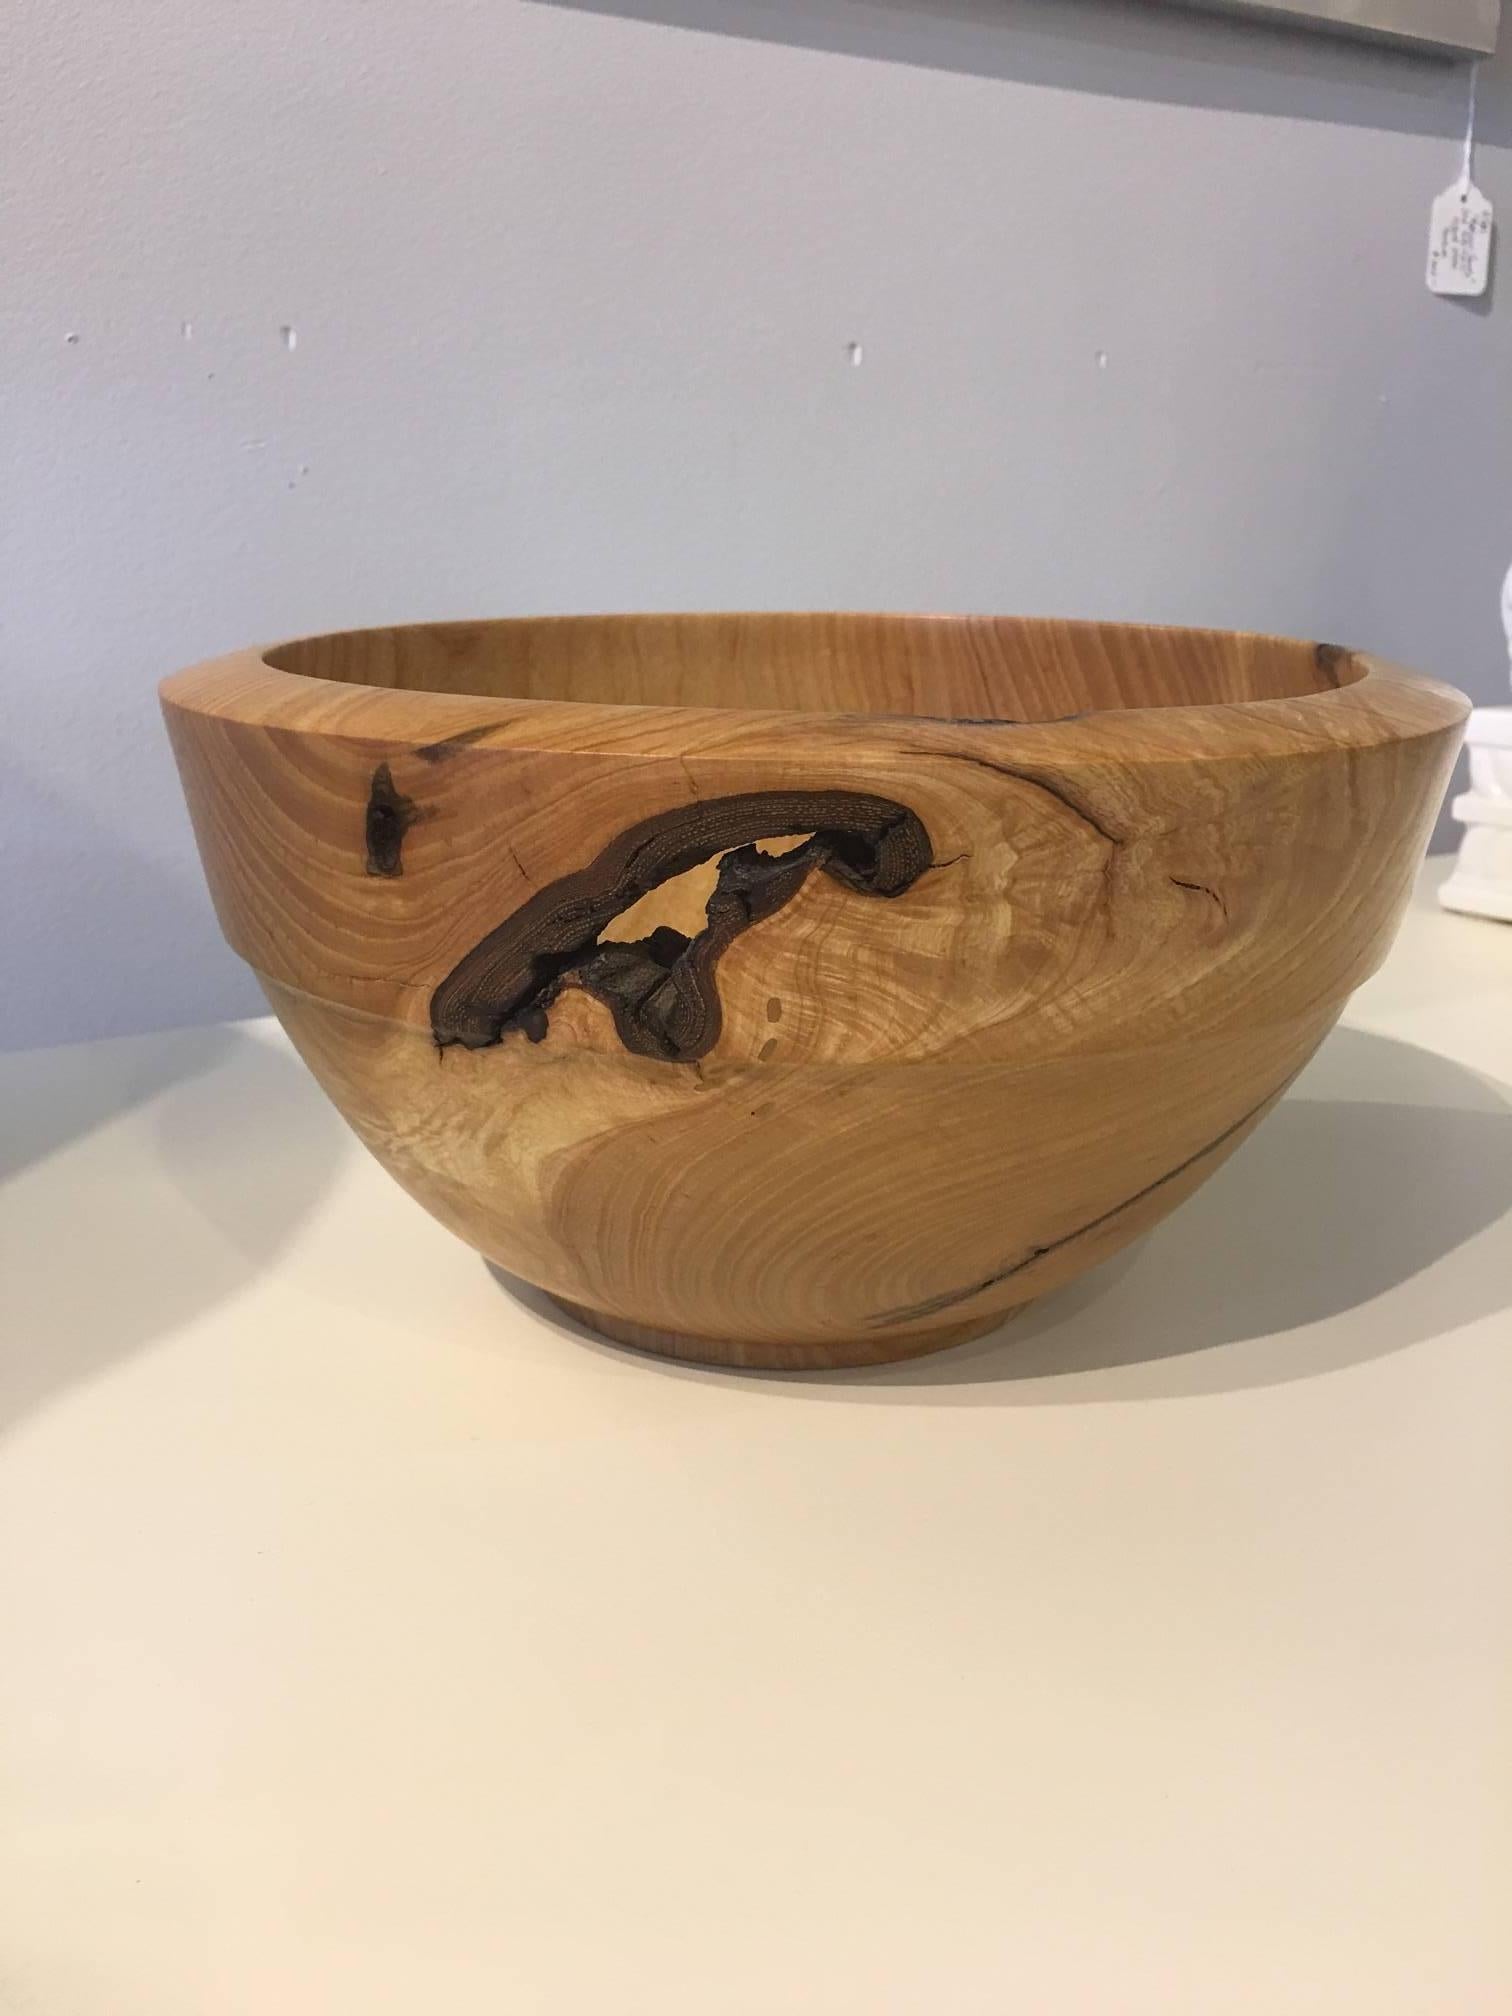 American Craftsman White Ash Handcrafted Bowl